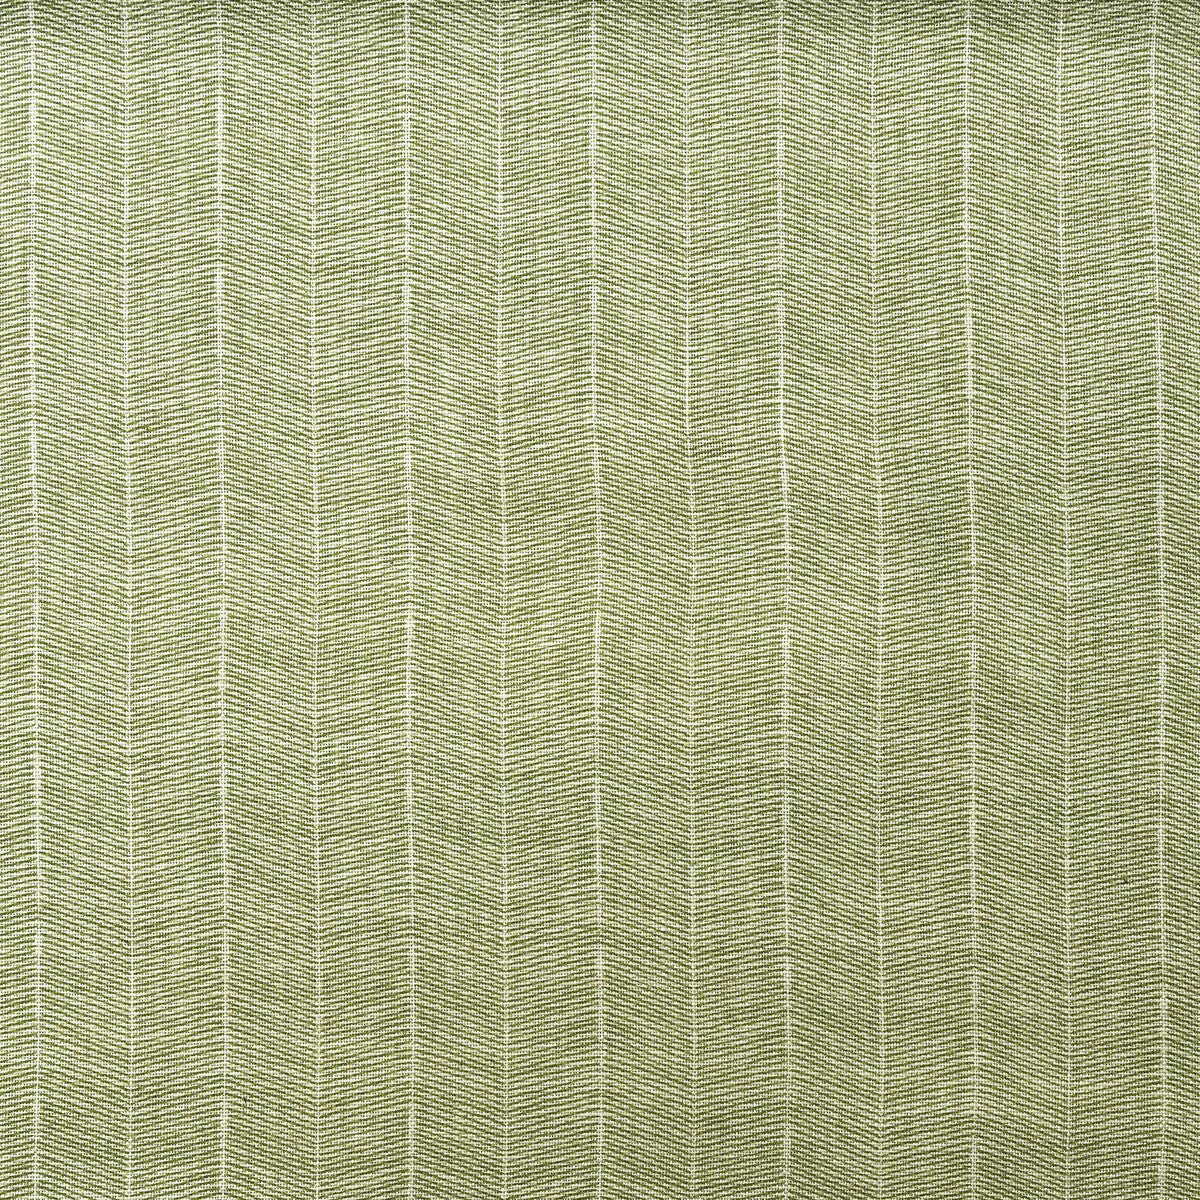 Furrow fabric in leaf color - pattern AM100380.3.0 - by Kravet Couture in the Andrew Martin Garden Path collection